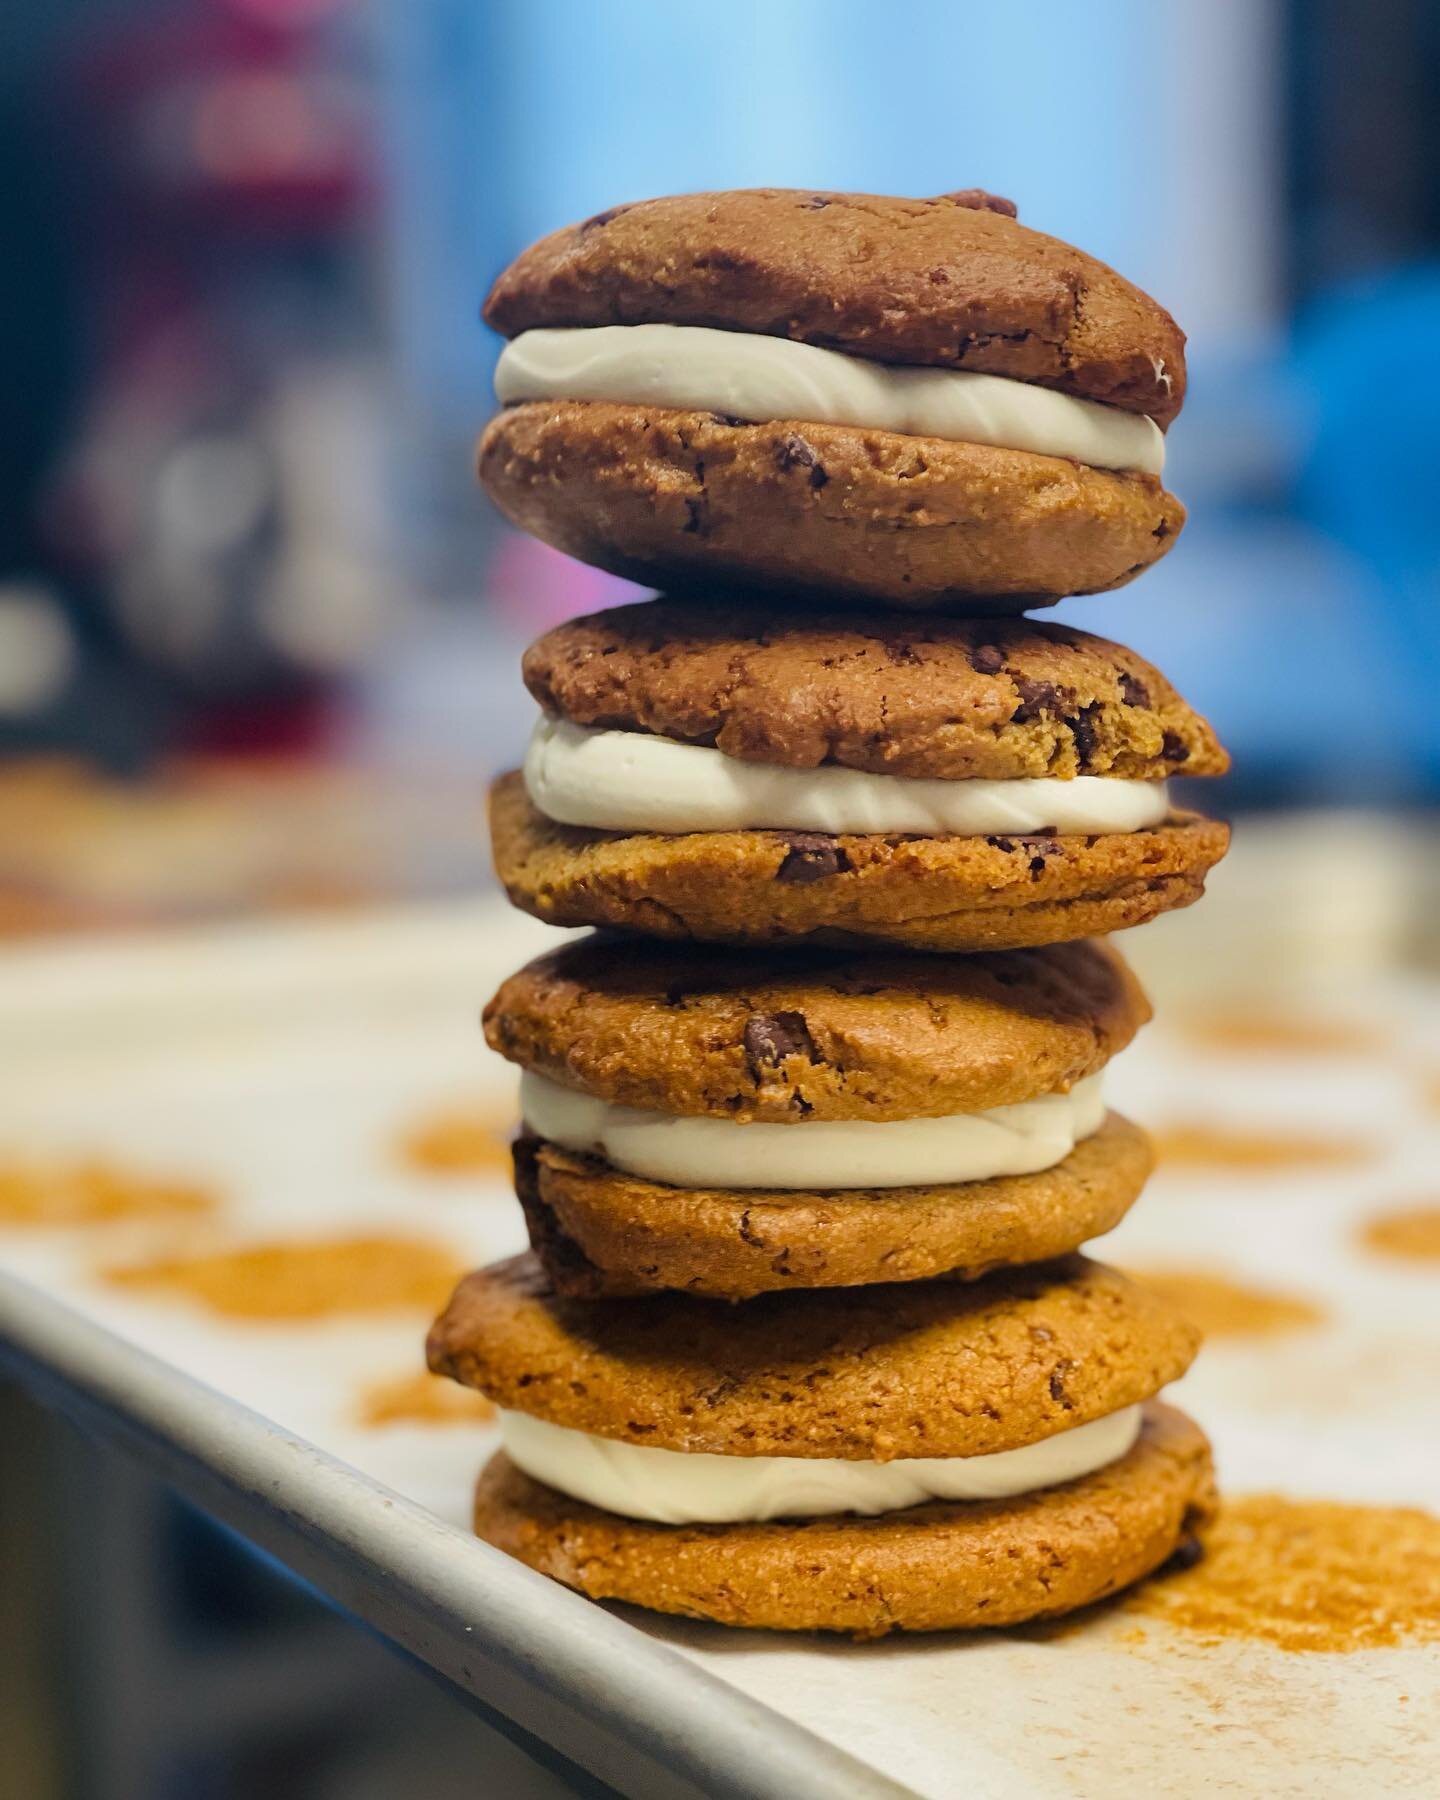 And your favorite Low Carb Dairy, Grain, &amp; Gluten Free Whoopie Cookies are available today. Saturday just got better 🤪

Both locations open at 9a on Saturdays! 

We sold out of these yesterday so come early friends. 

Always Organic, Grain &amp;